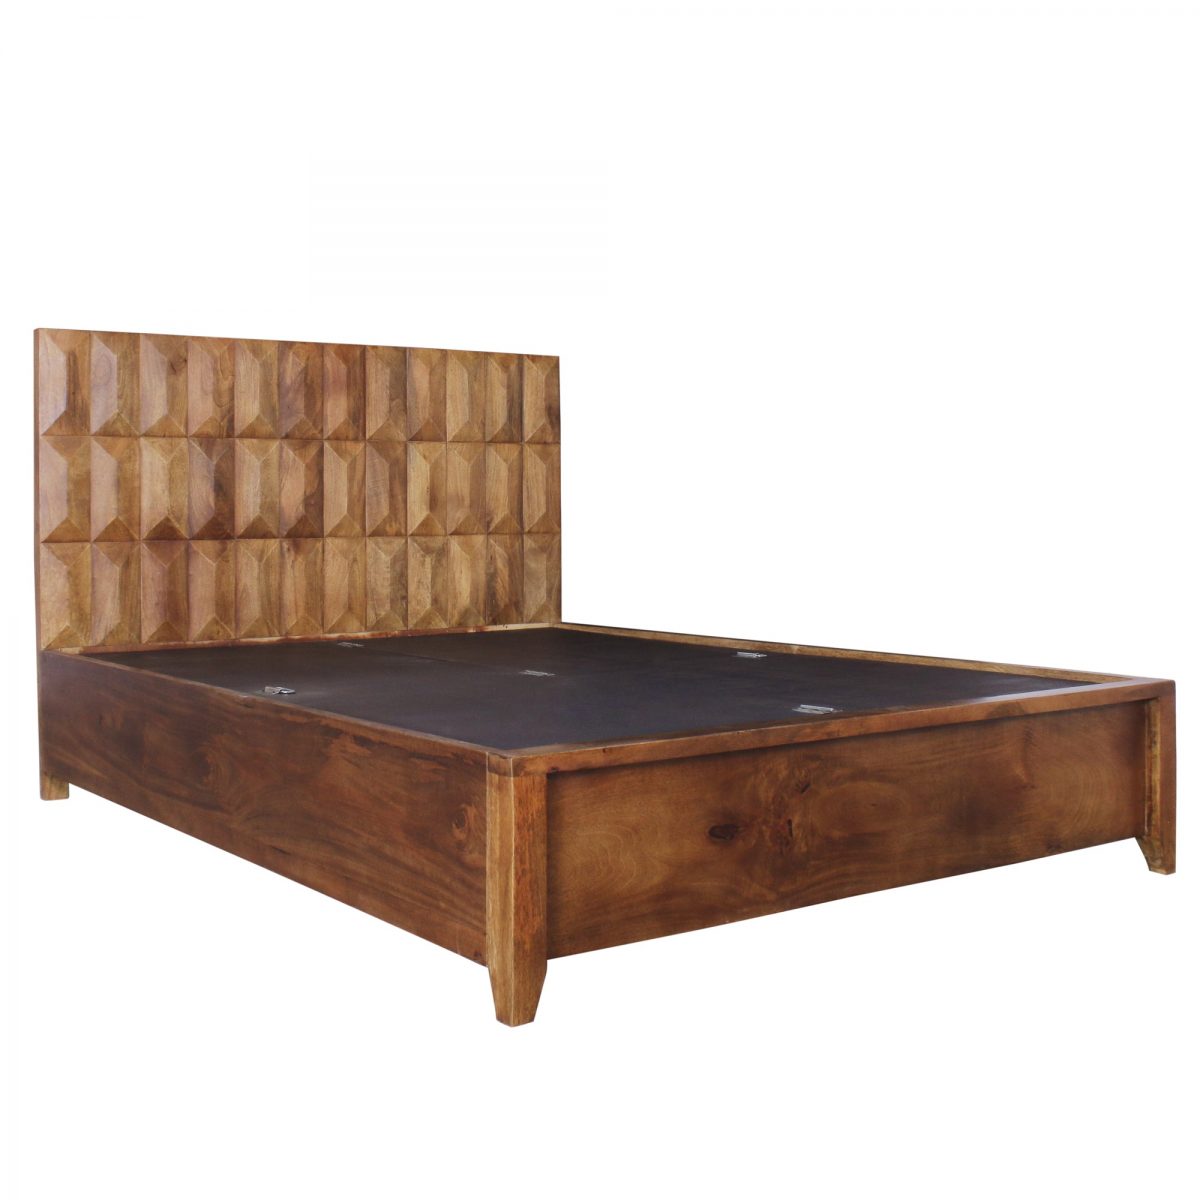 Mid Century Style Geometric Pattern Solid Wood Bed With Storage In Light Walnut - King Size